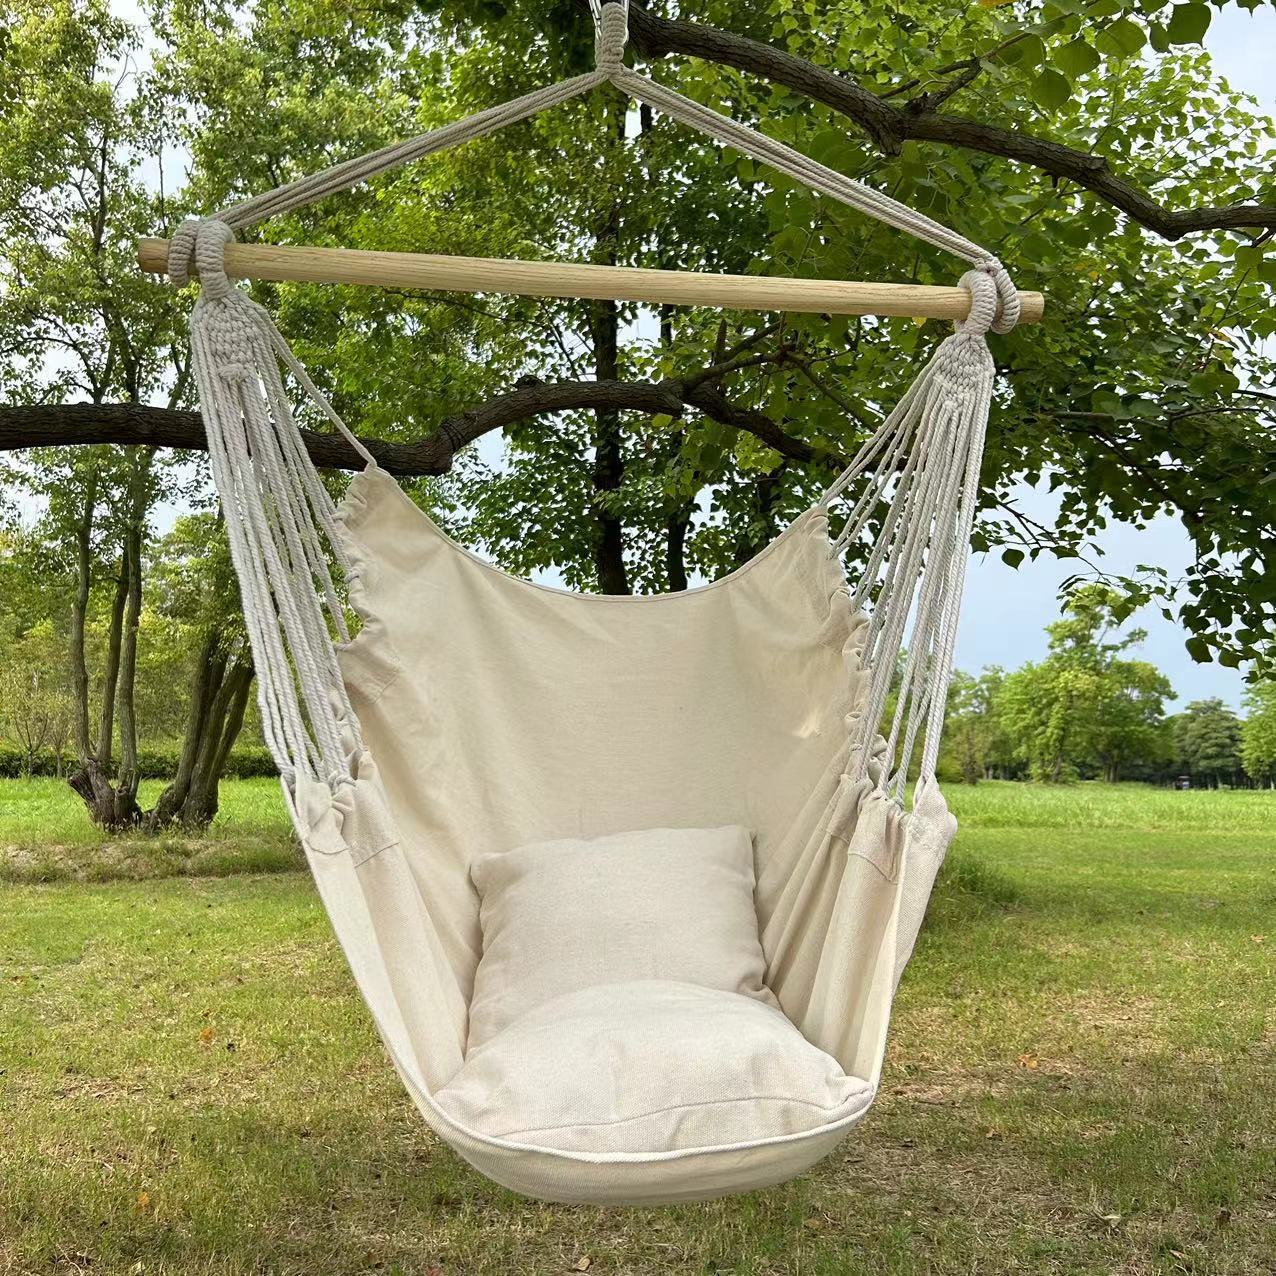 off-white (Hanging chair and rope)